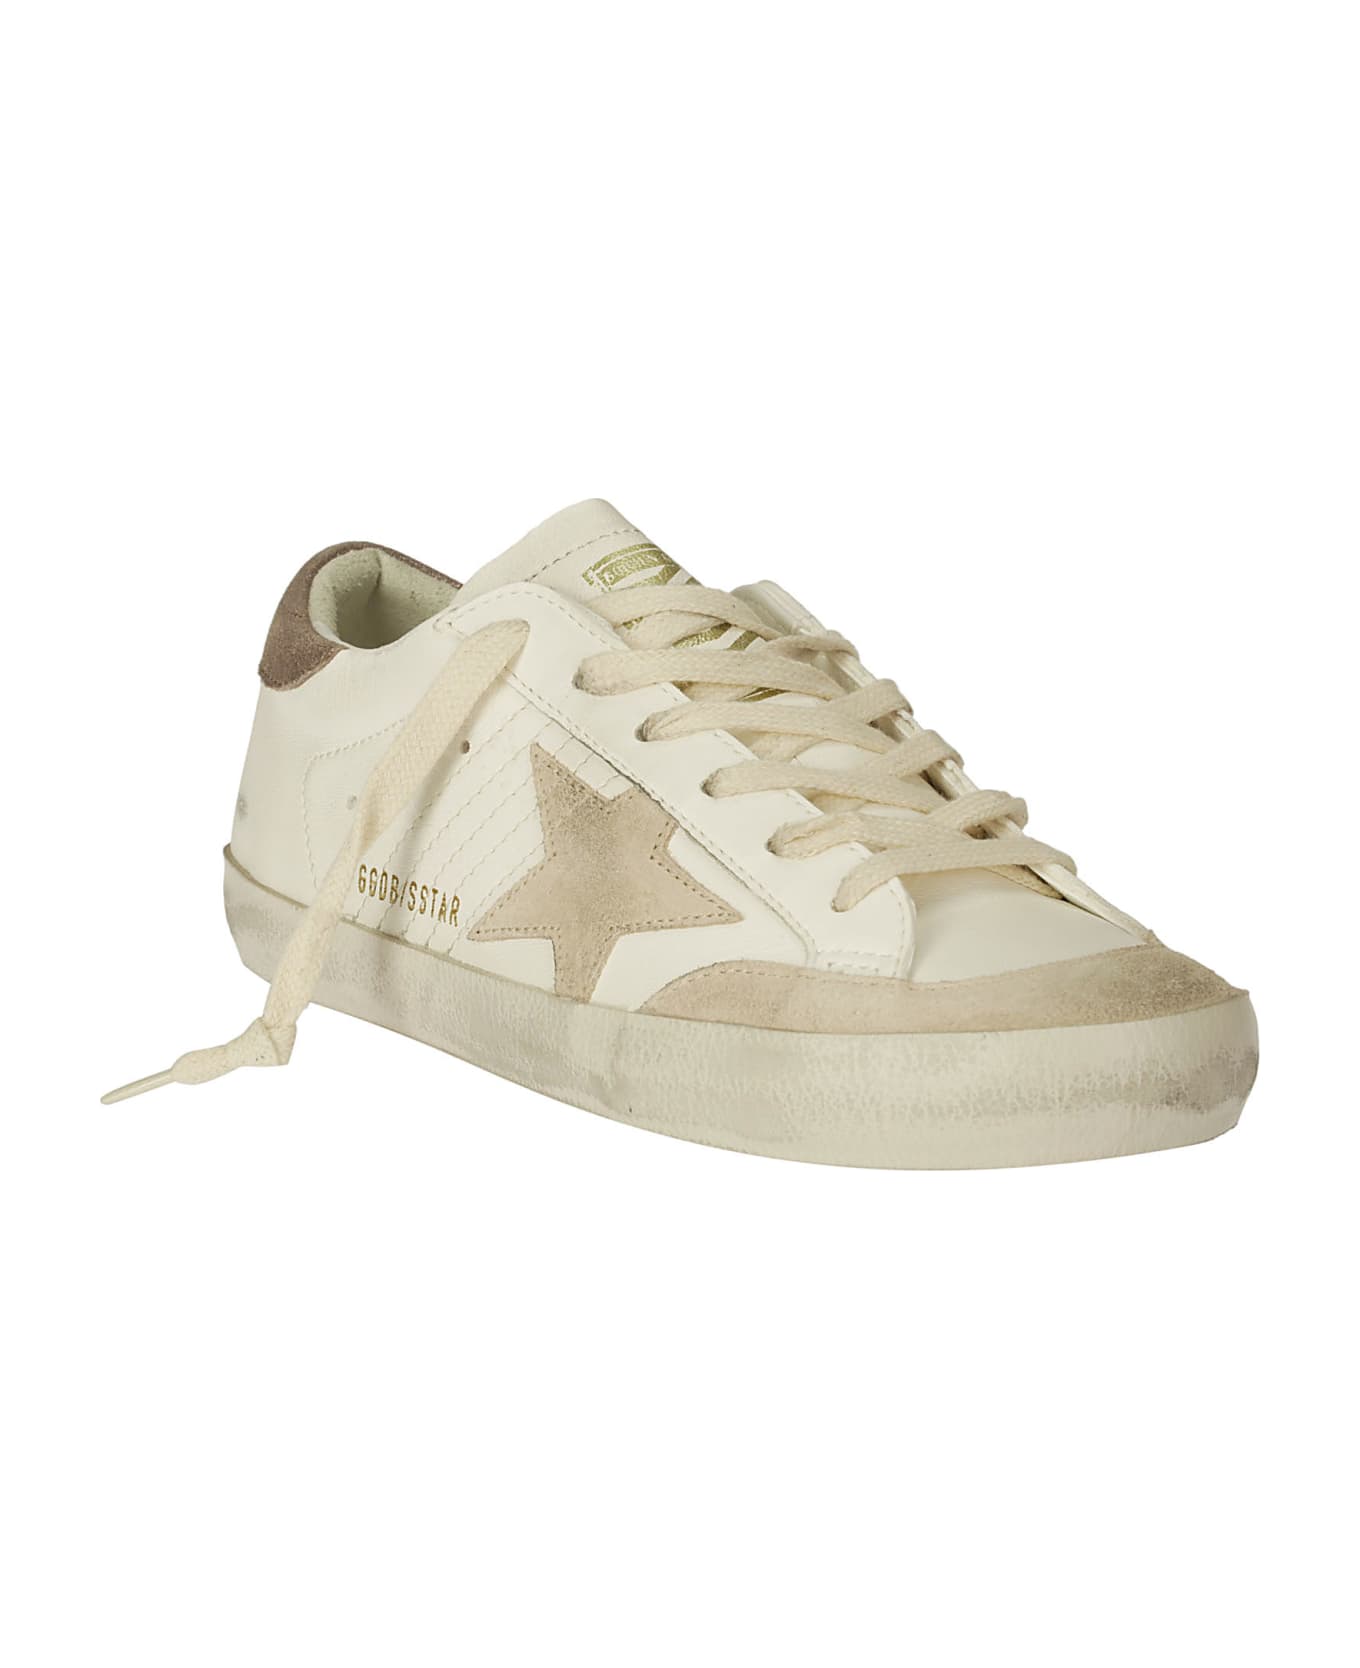 Golden Goose Super Star Lace-up Sneakers - WHITE/BEIGE/LIGHT BROWN スニーカー